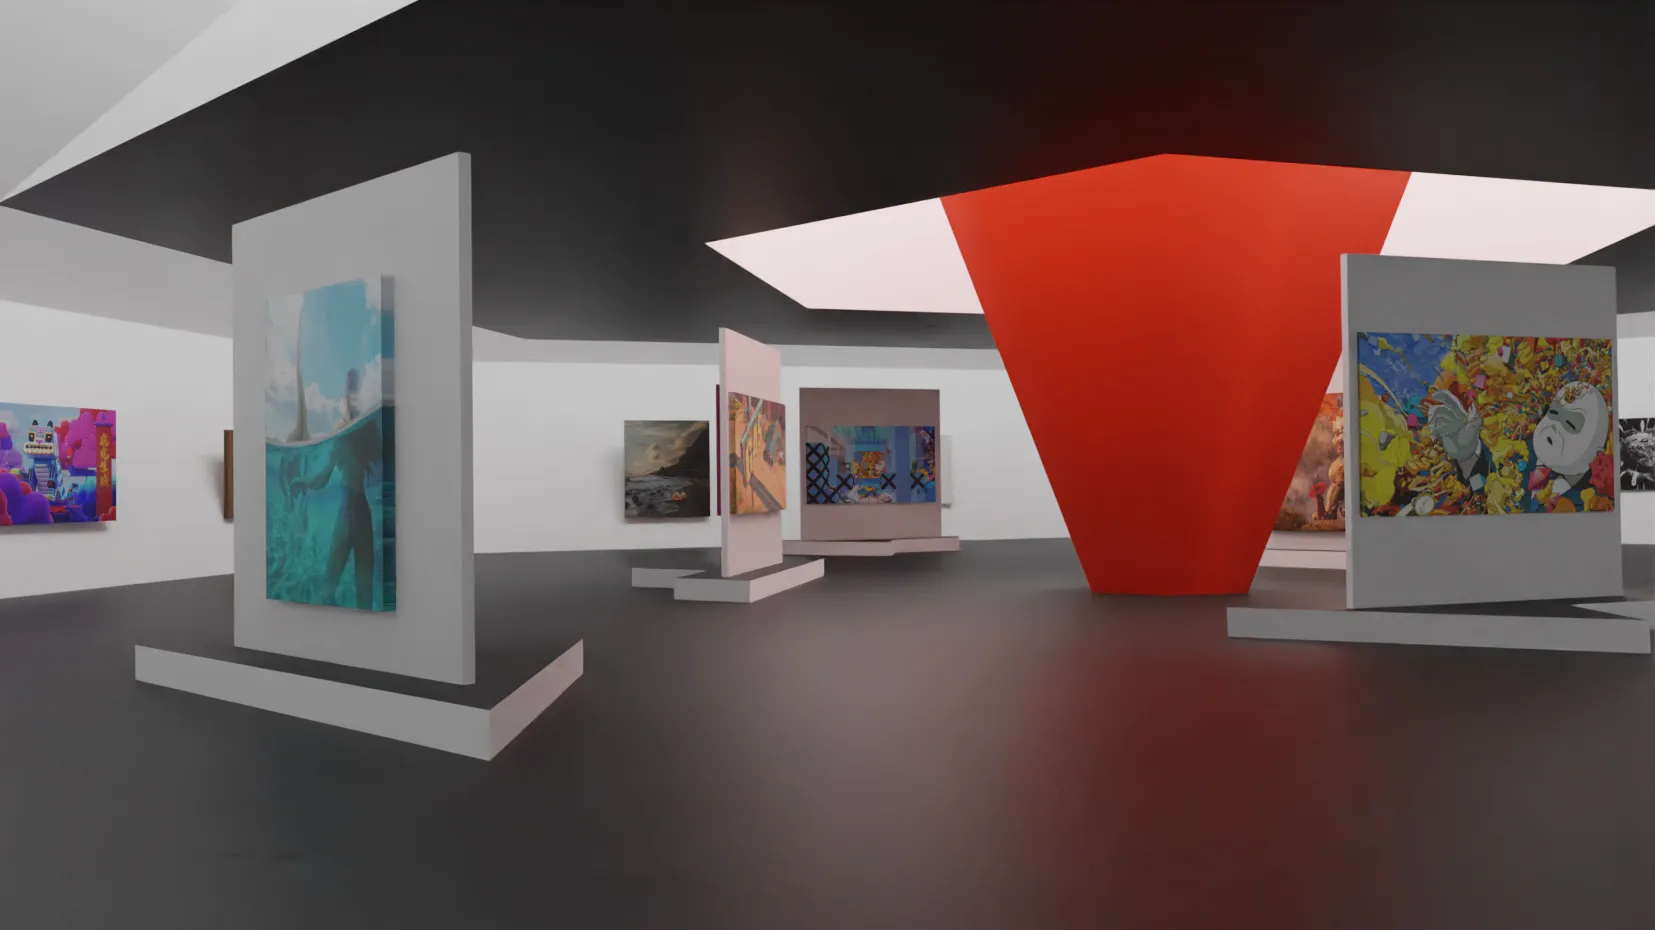 Image of the virtual gallery